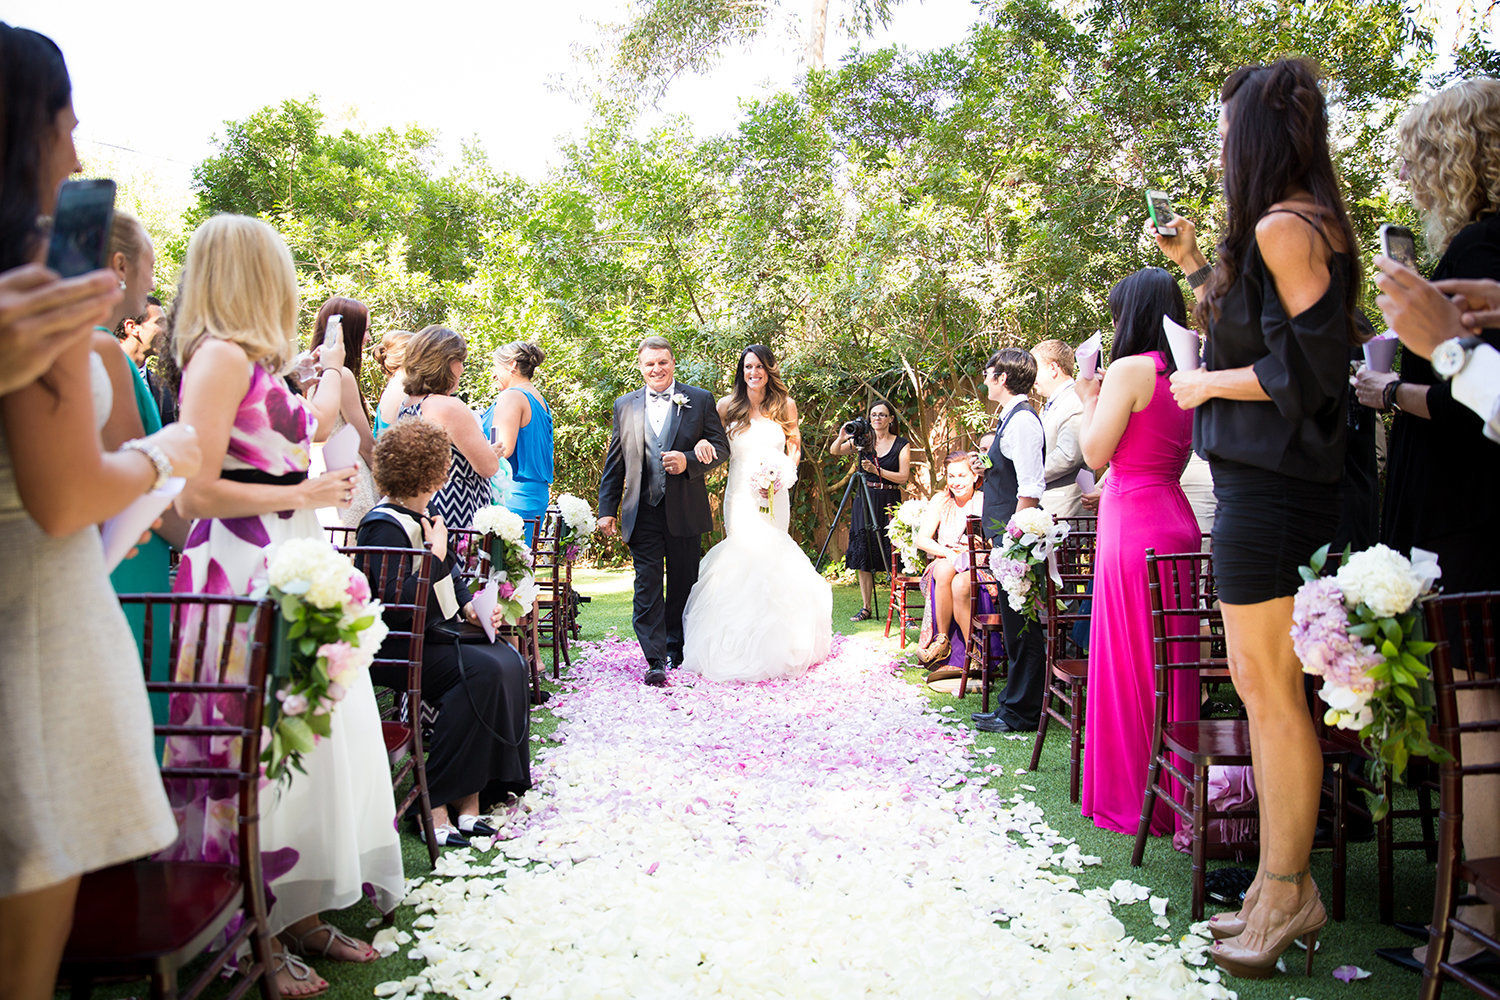 Here comes the bride | Colorful flower petal aisle wedding decorations